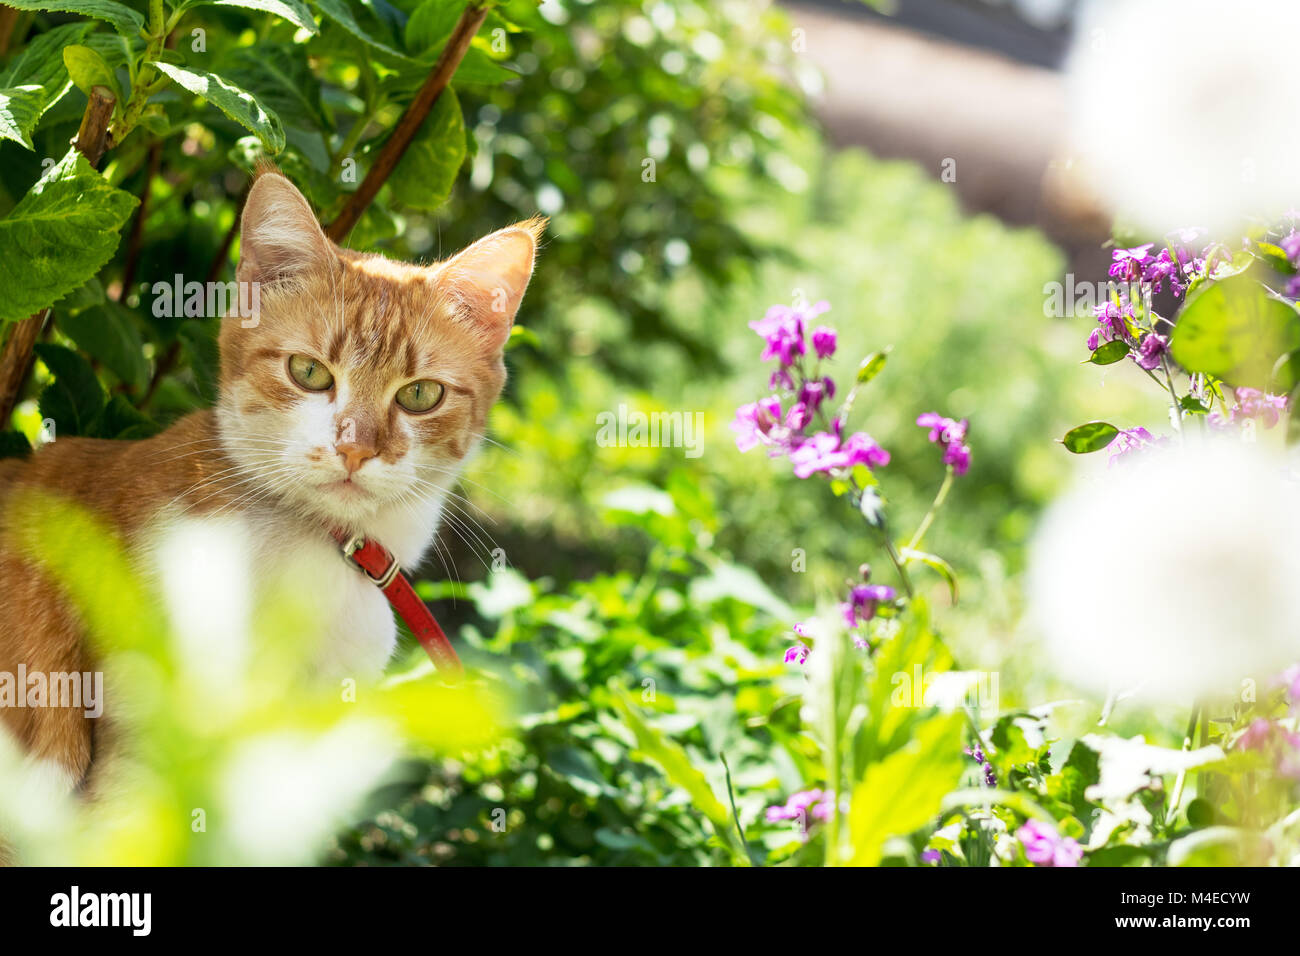 Cute white-red cat in a red collar on the garden Stock Photo